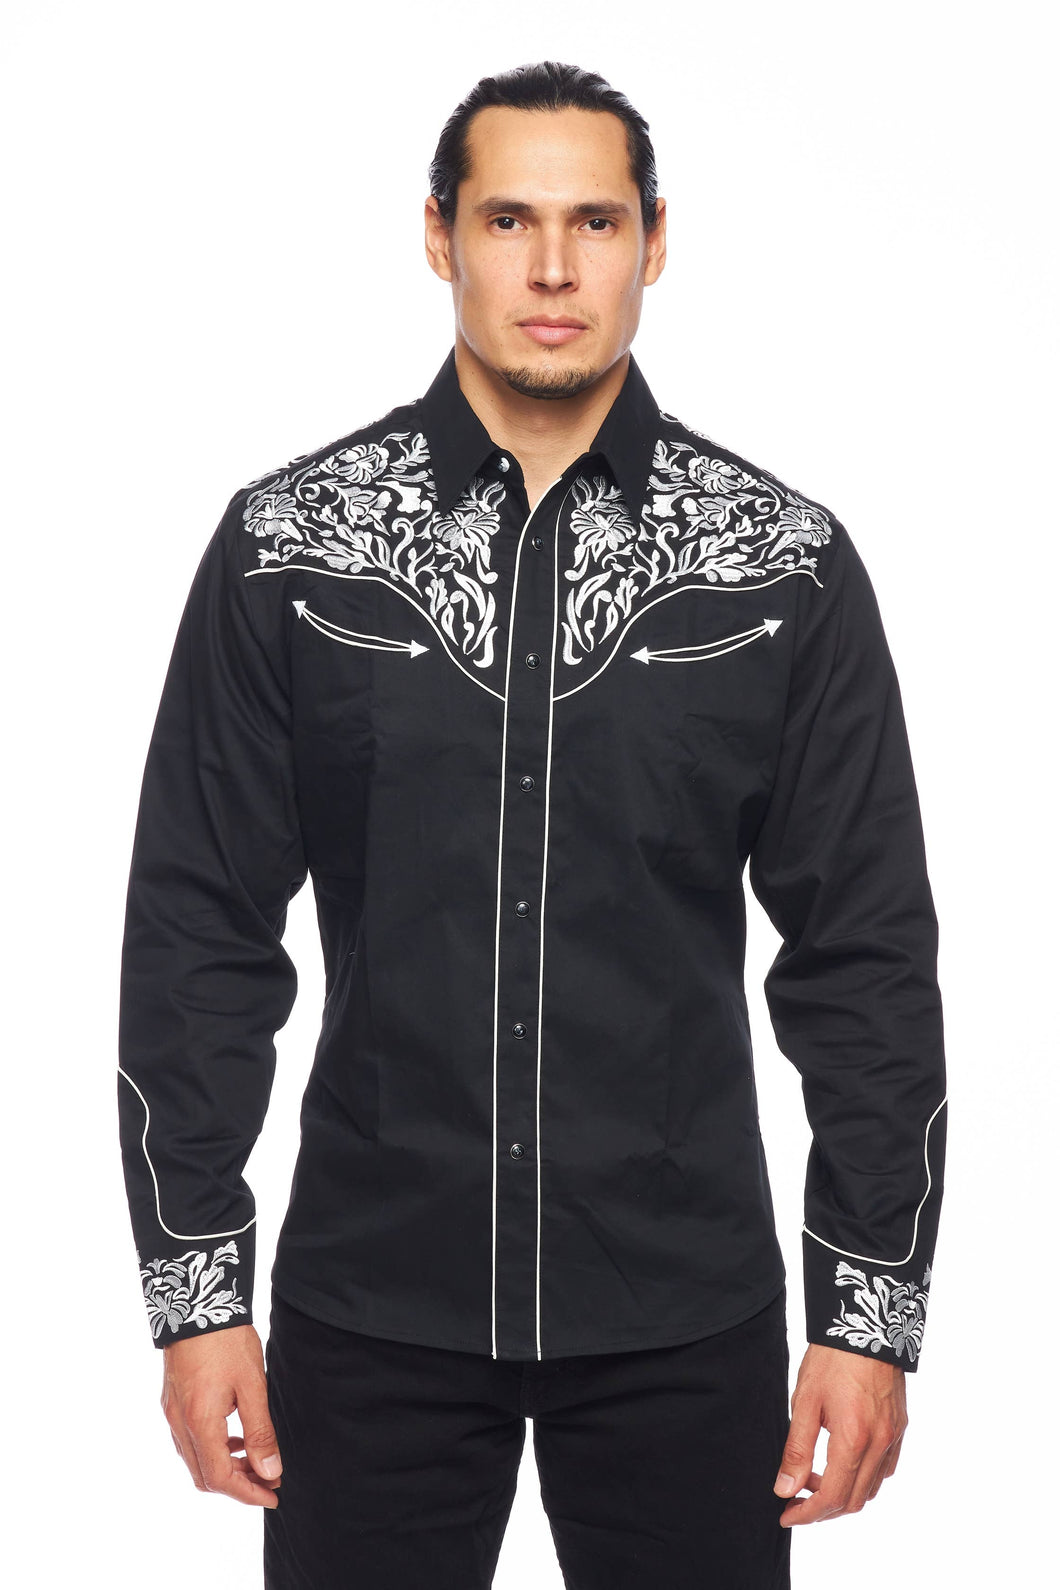 RODEO Men's Western Embroidery Shirt PS-500-562